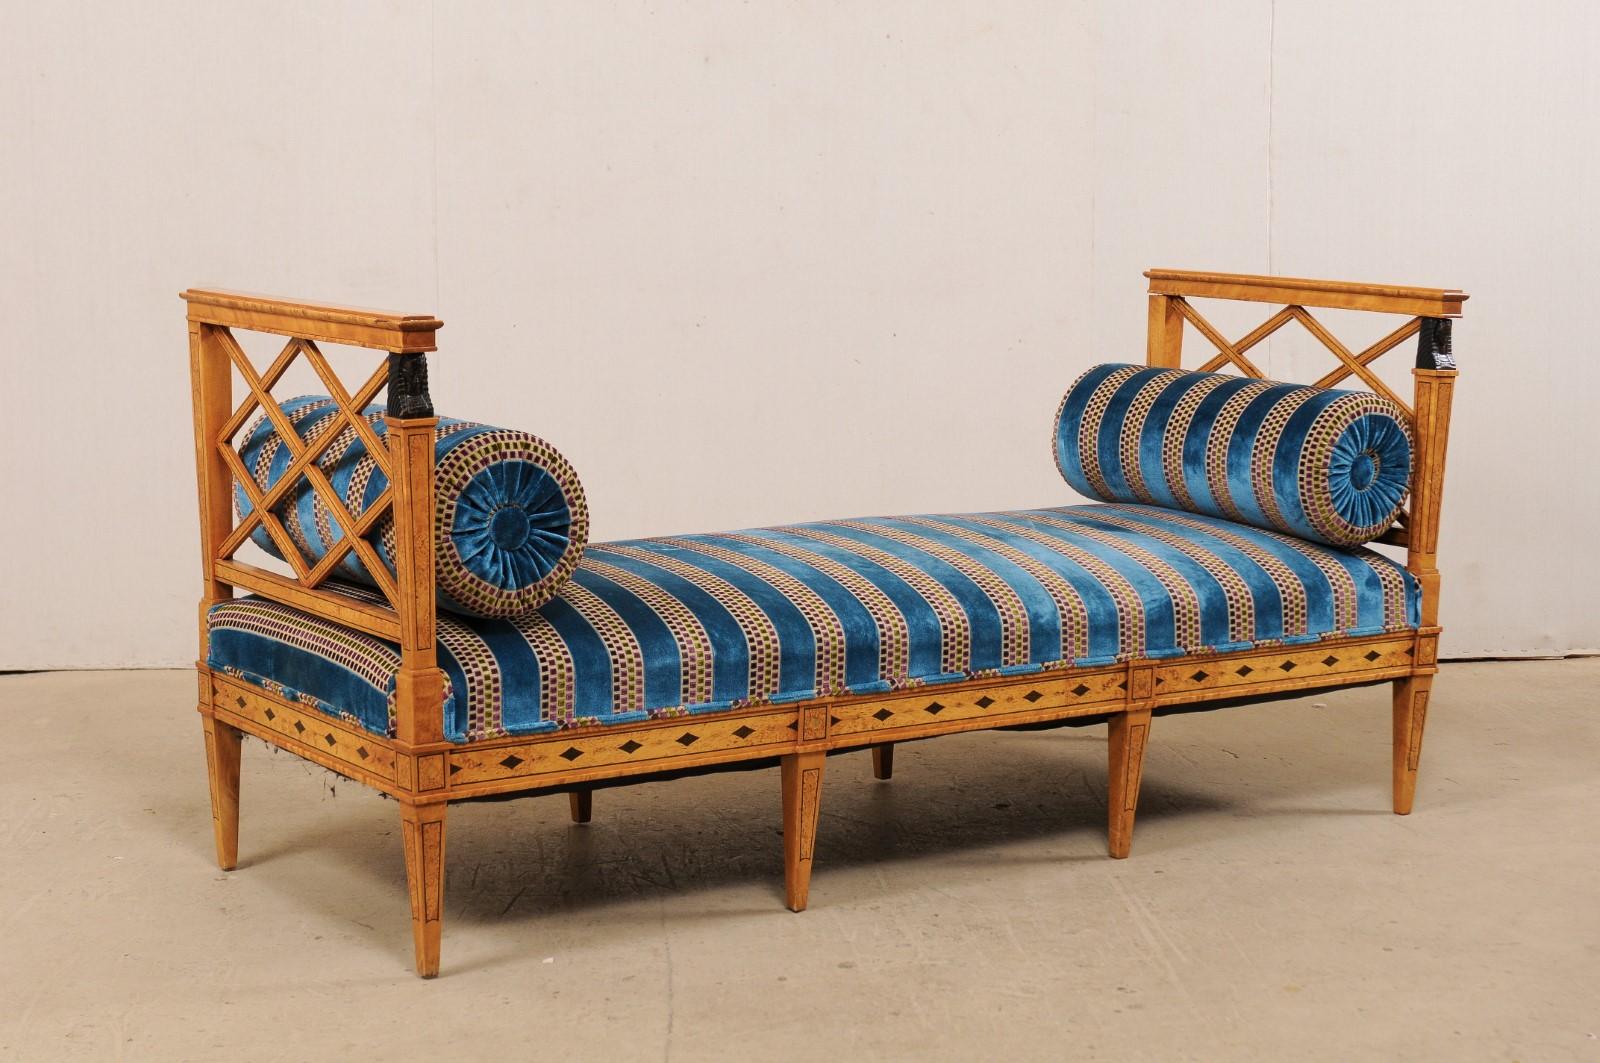 A Swedish neoclassical style bench from the 19th century with upholstered seat. This antique bench from Sweden features a neoclassical design with Egyptian Revival carved arm posts, and is made of birch wood with burl inlay and ebonized wood